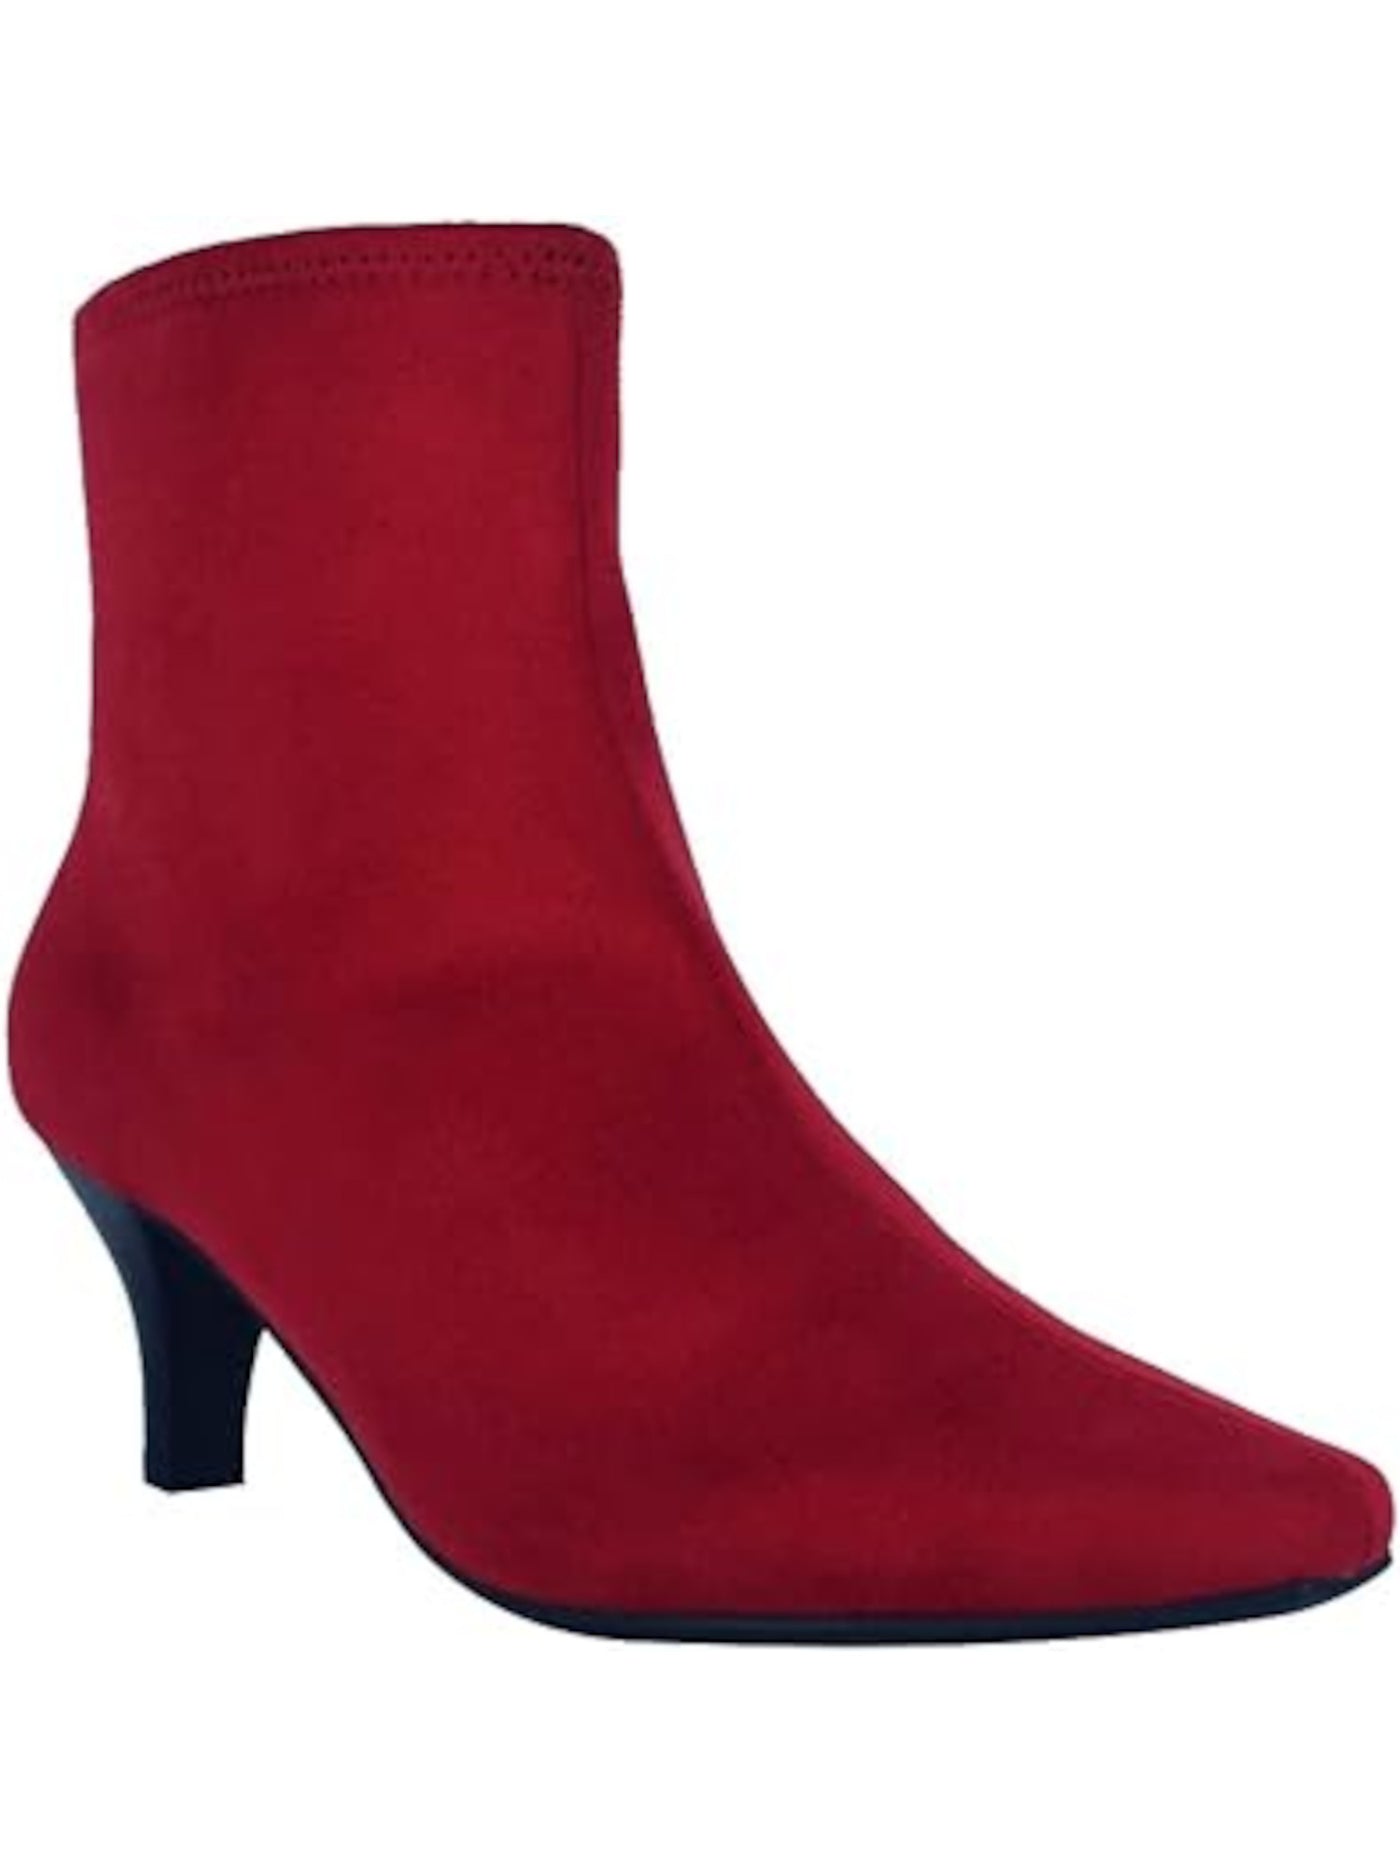 IMPO Womens Red Cushioned Stretch Naja Pointed Toe Kitten Heel Zip-Up Dress Booties 6.5 M